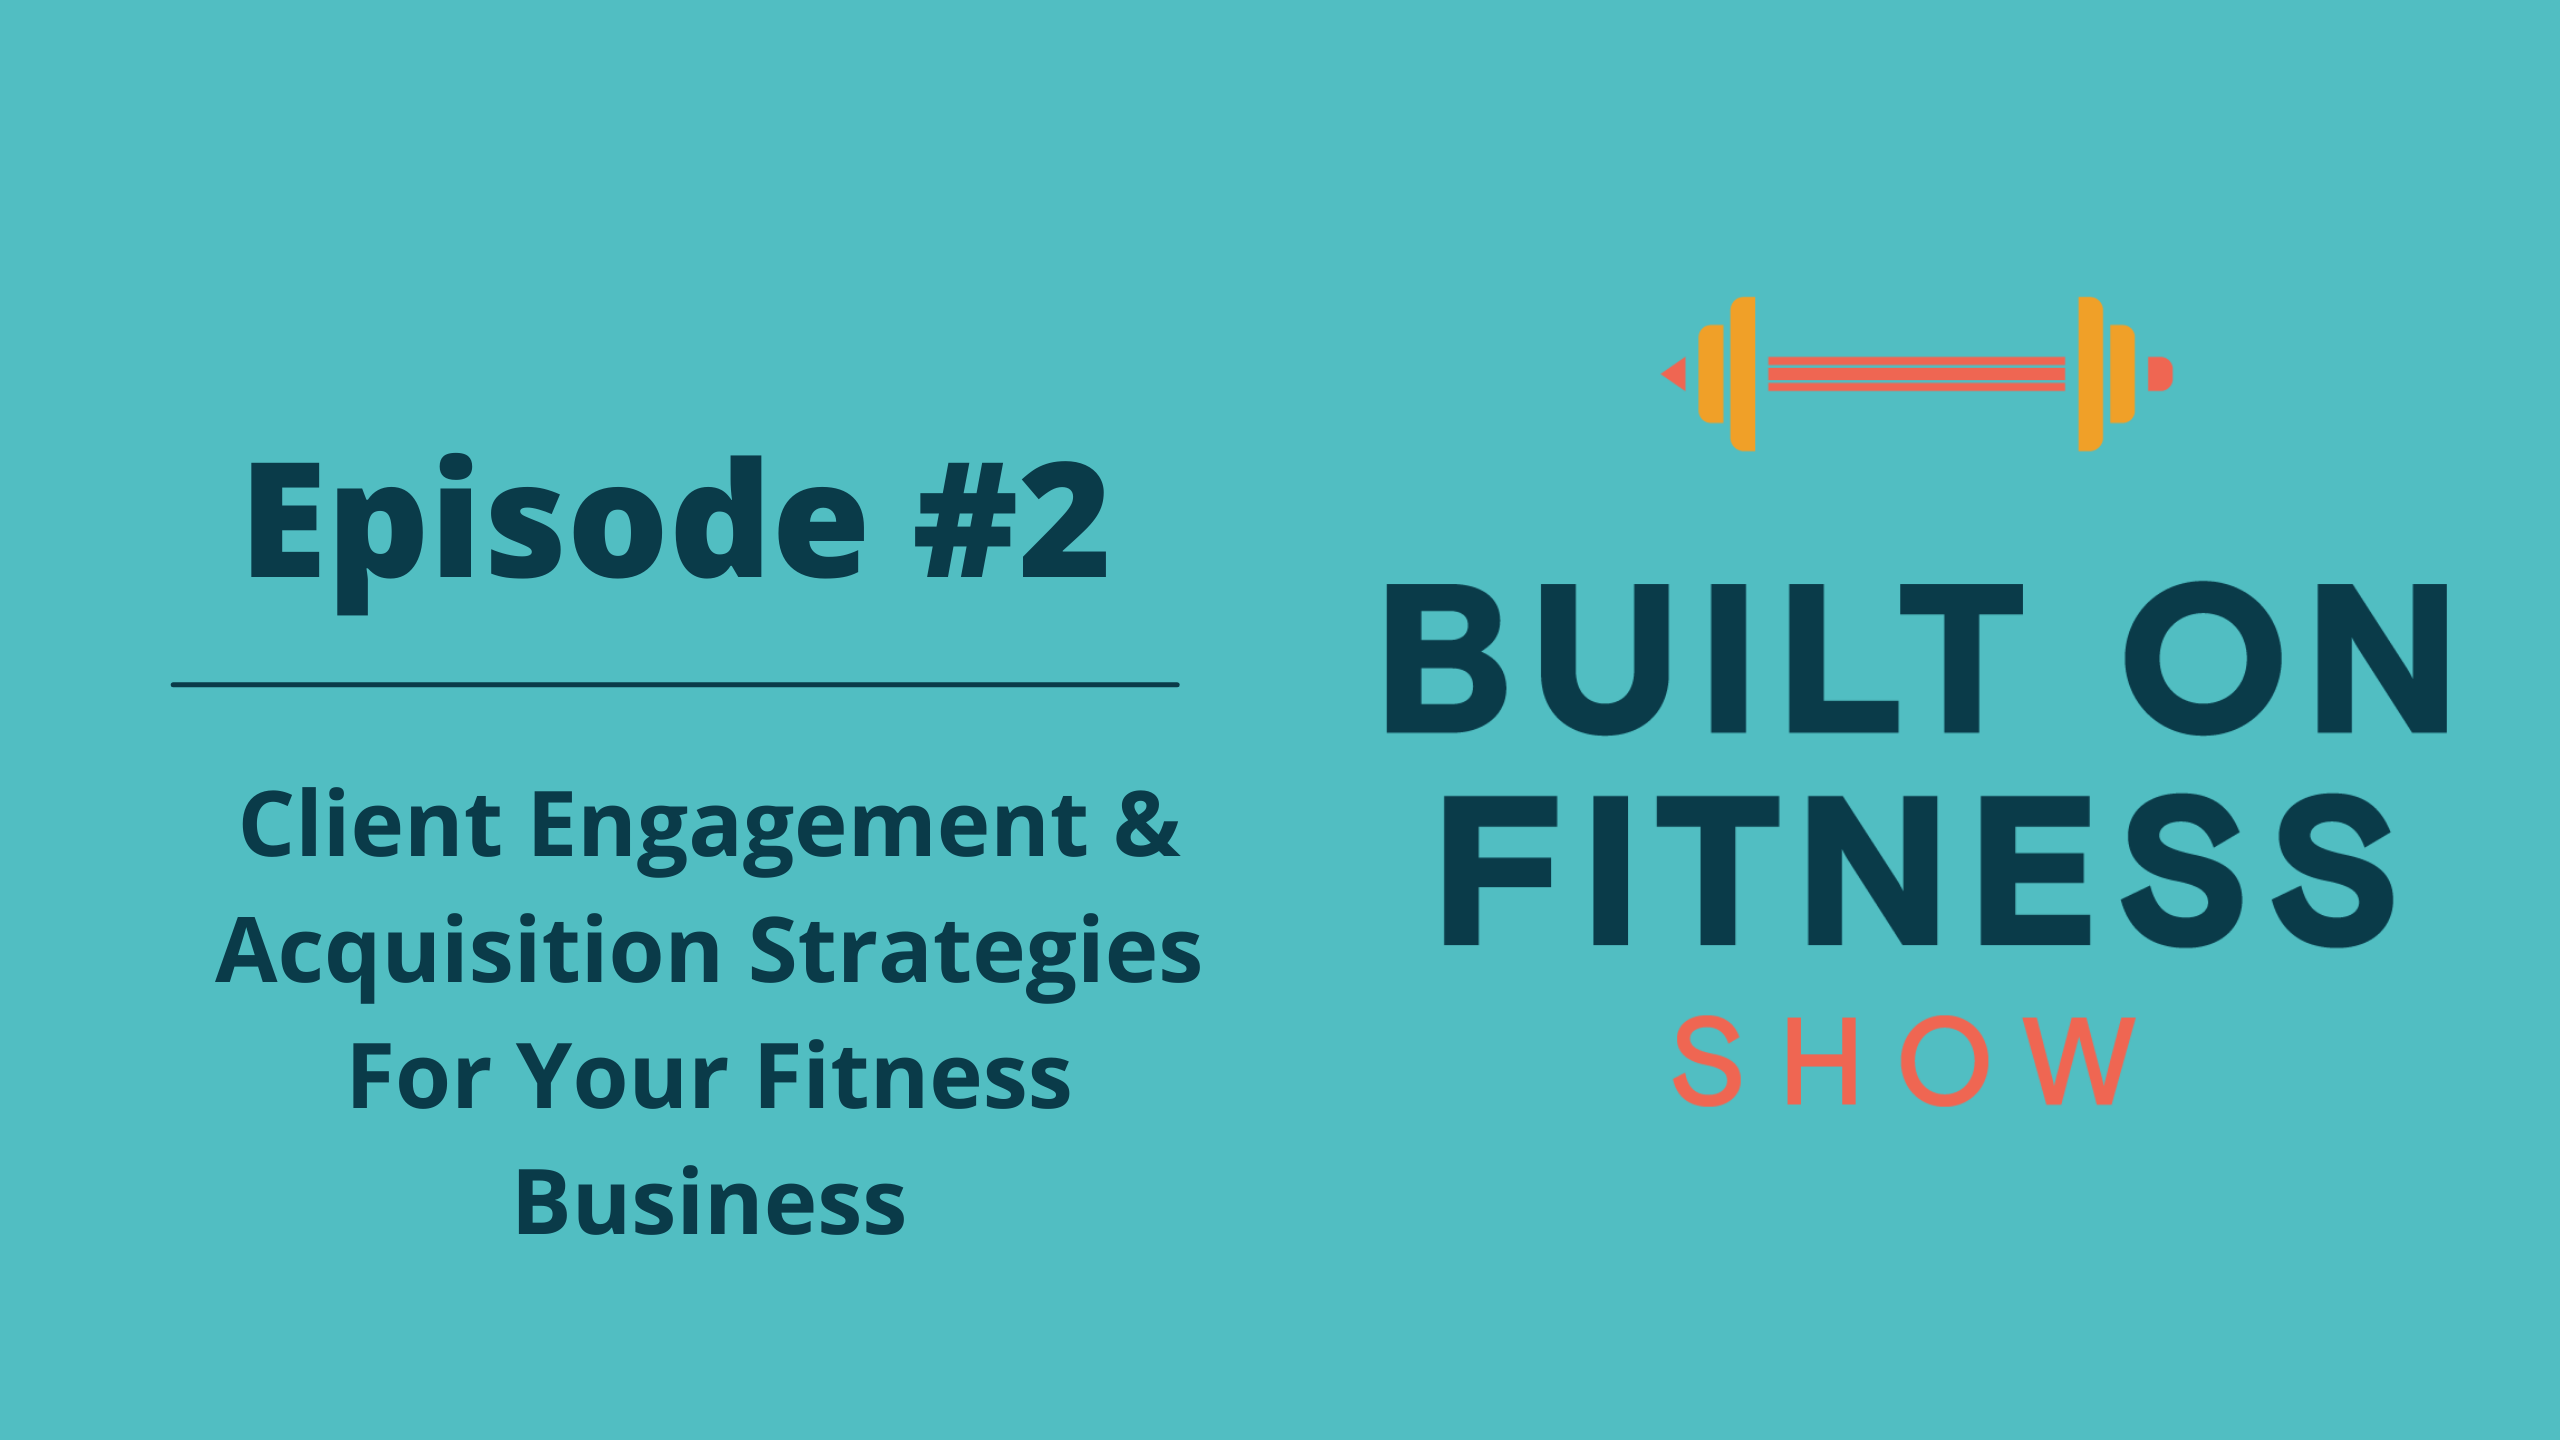 Built On Fitness Show Episode 2 Recap: Strategies for Client Engagement and Acquisition